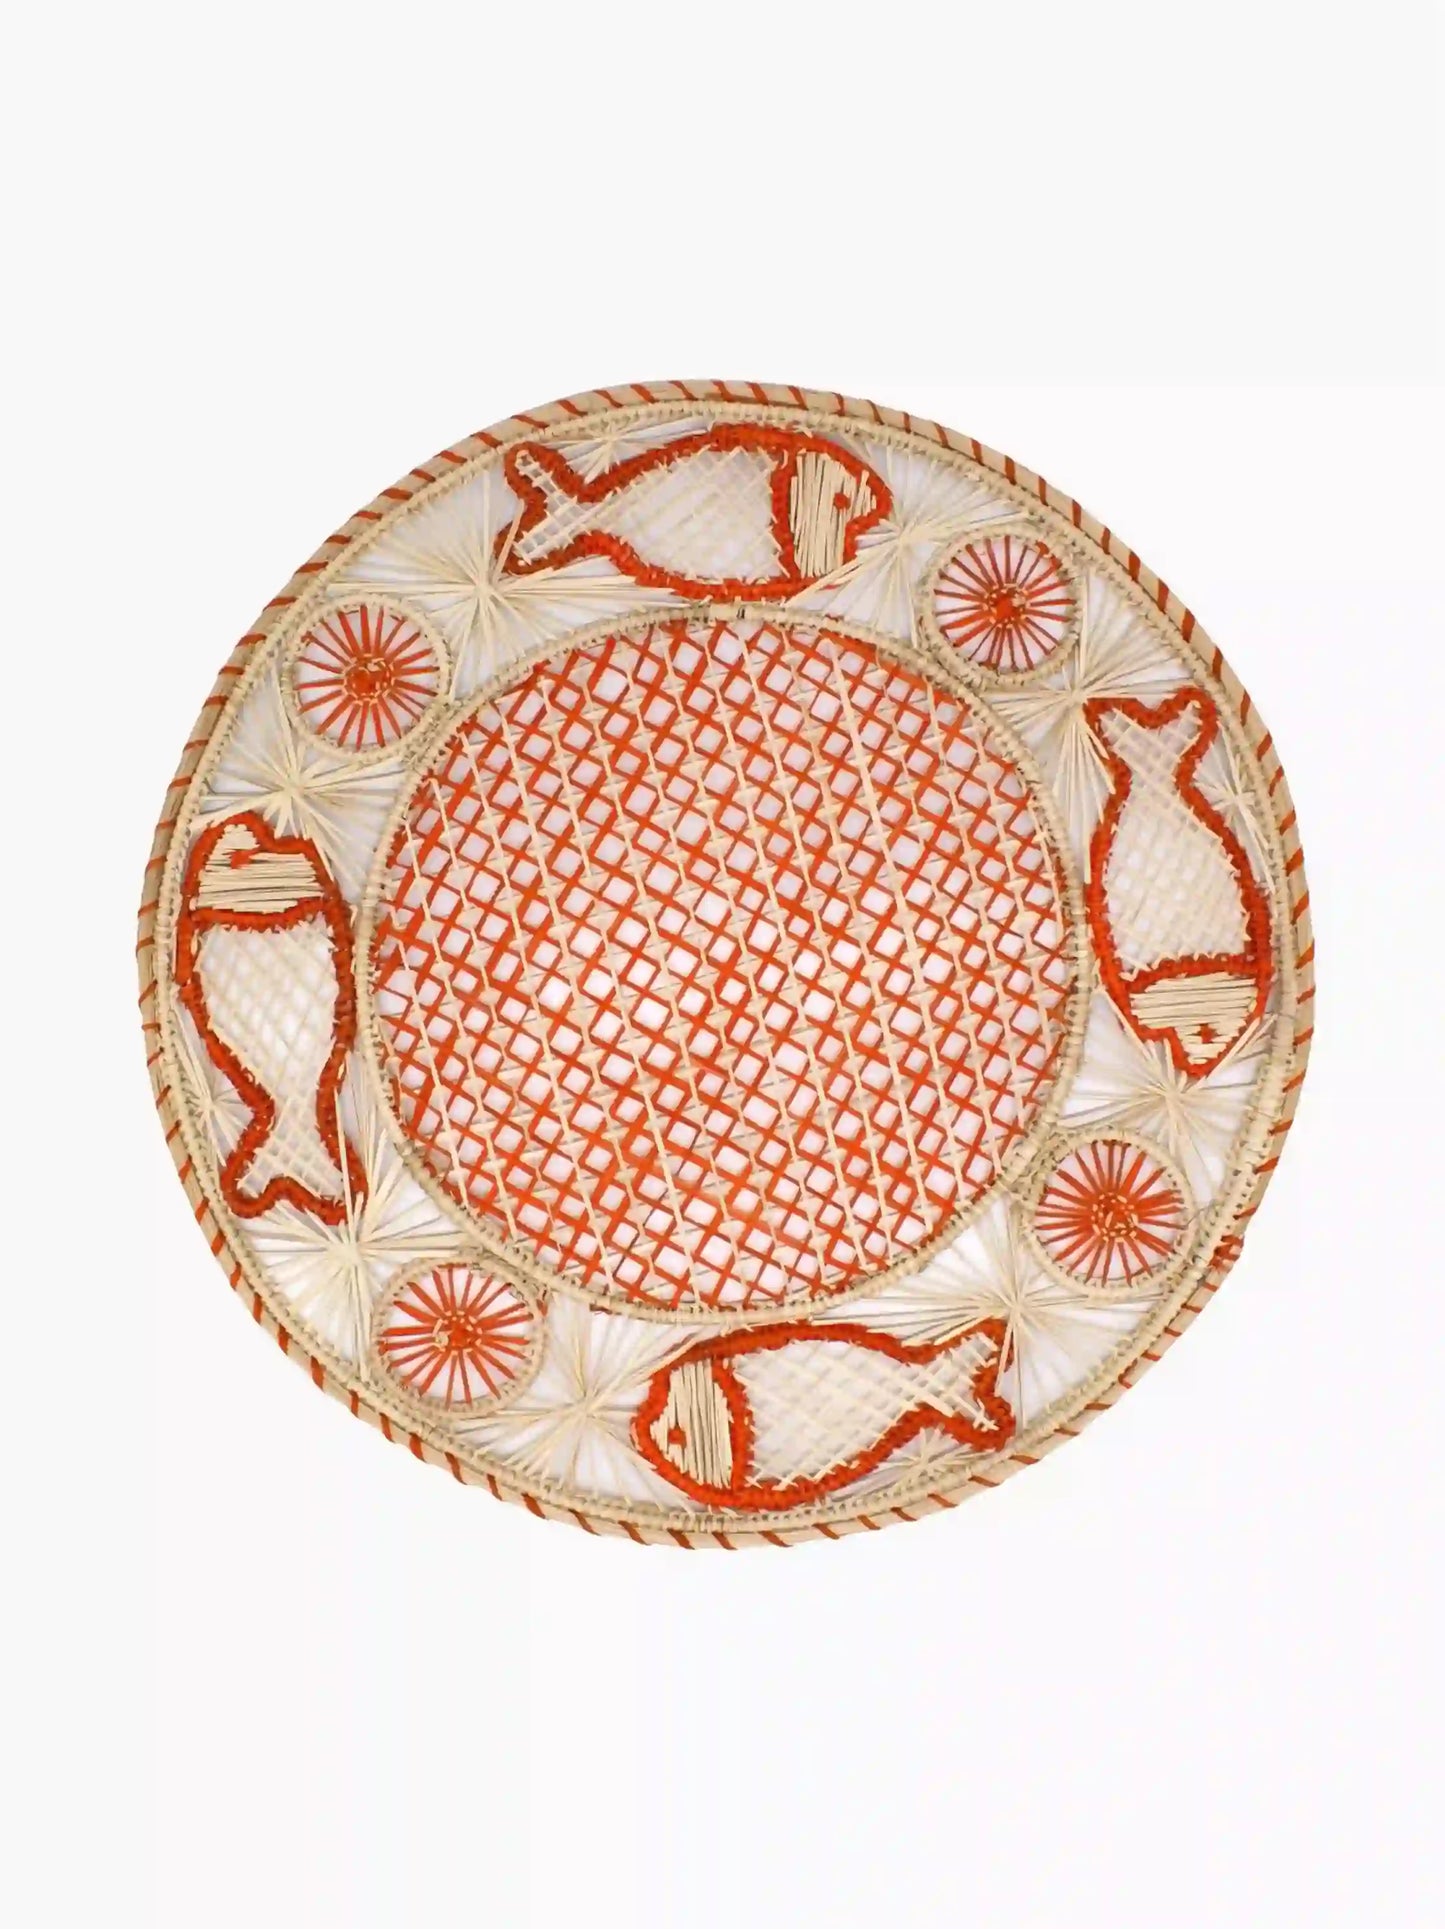 Woven Straw Fish Placemats Set